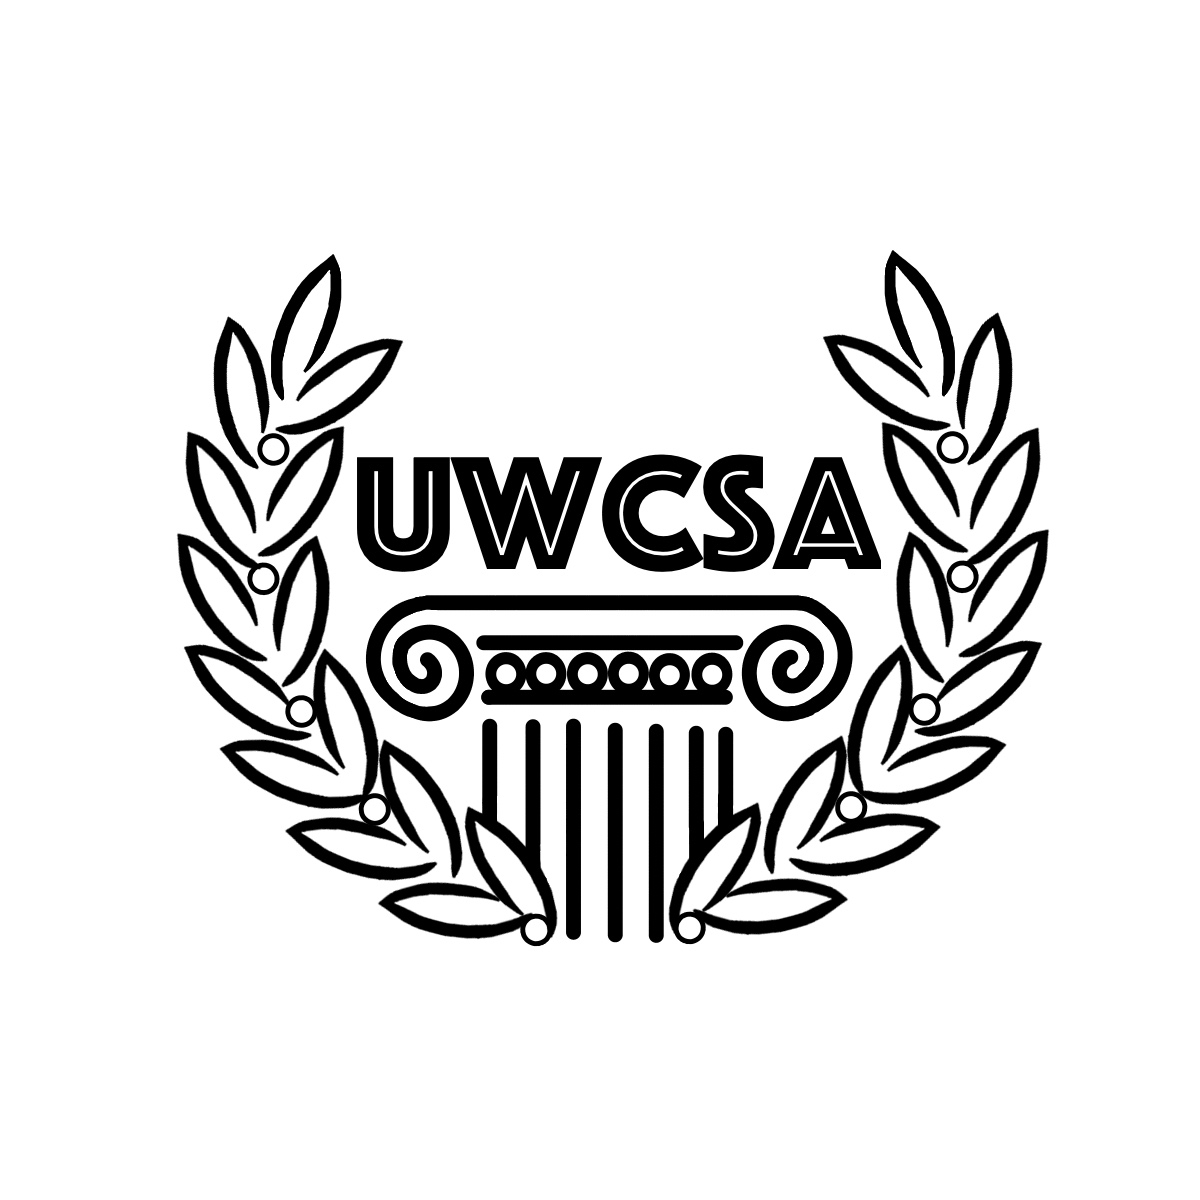 UWCSA surrounded by laurel wreath